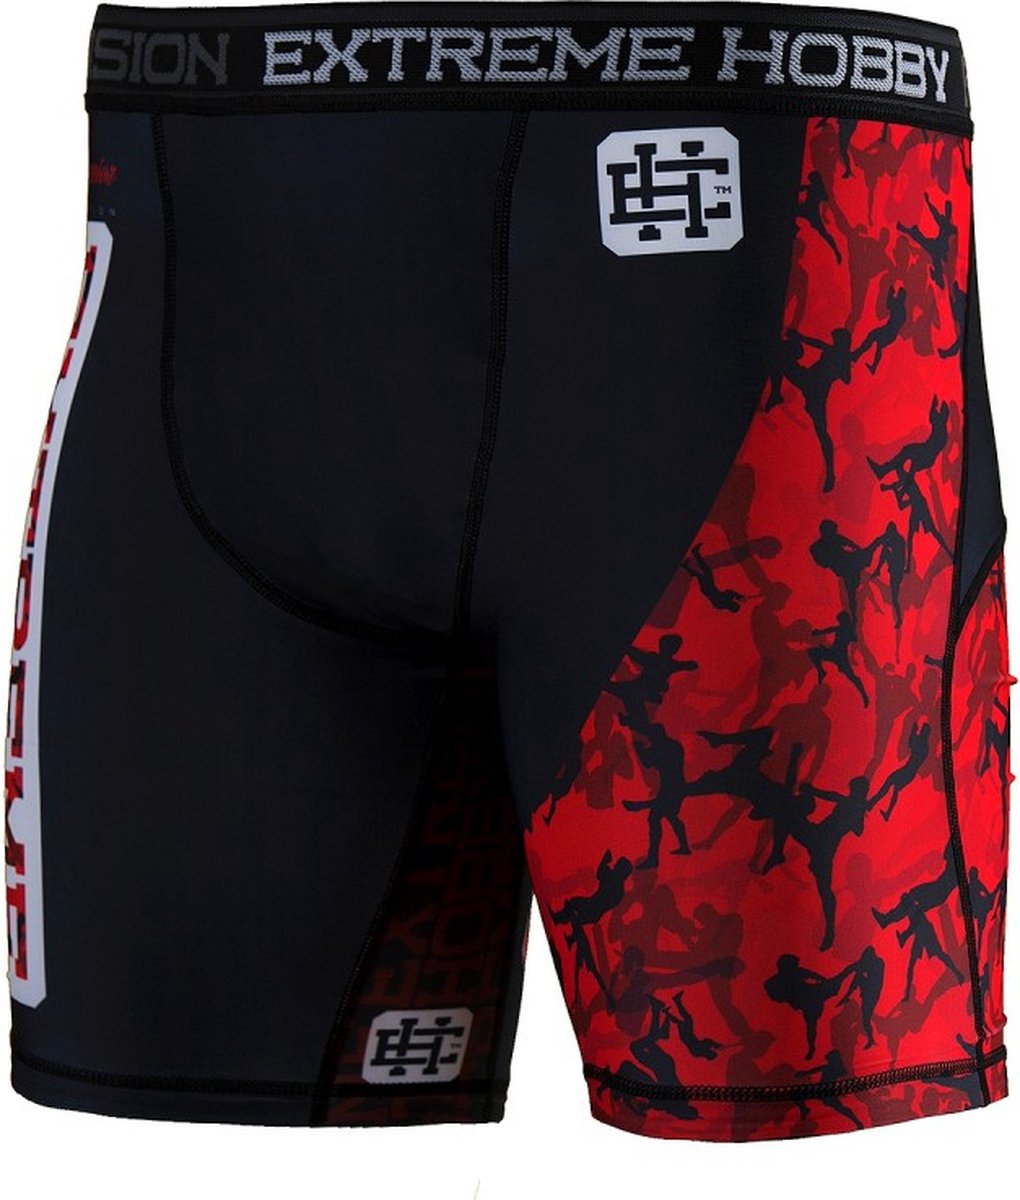 Extreme Hobby - Grappling Vale Tudo Shorts - MMA/BJJ Compressie shorts - Red Warrior - Rood, Zwart - Maat M